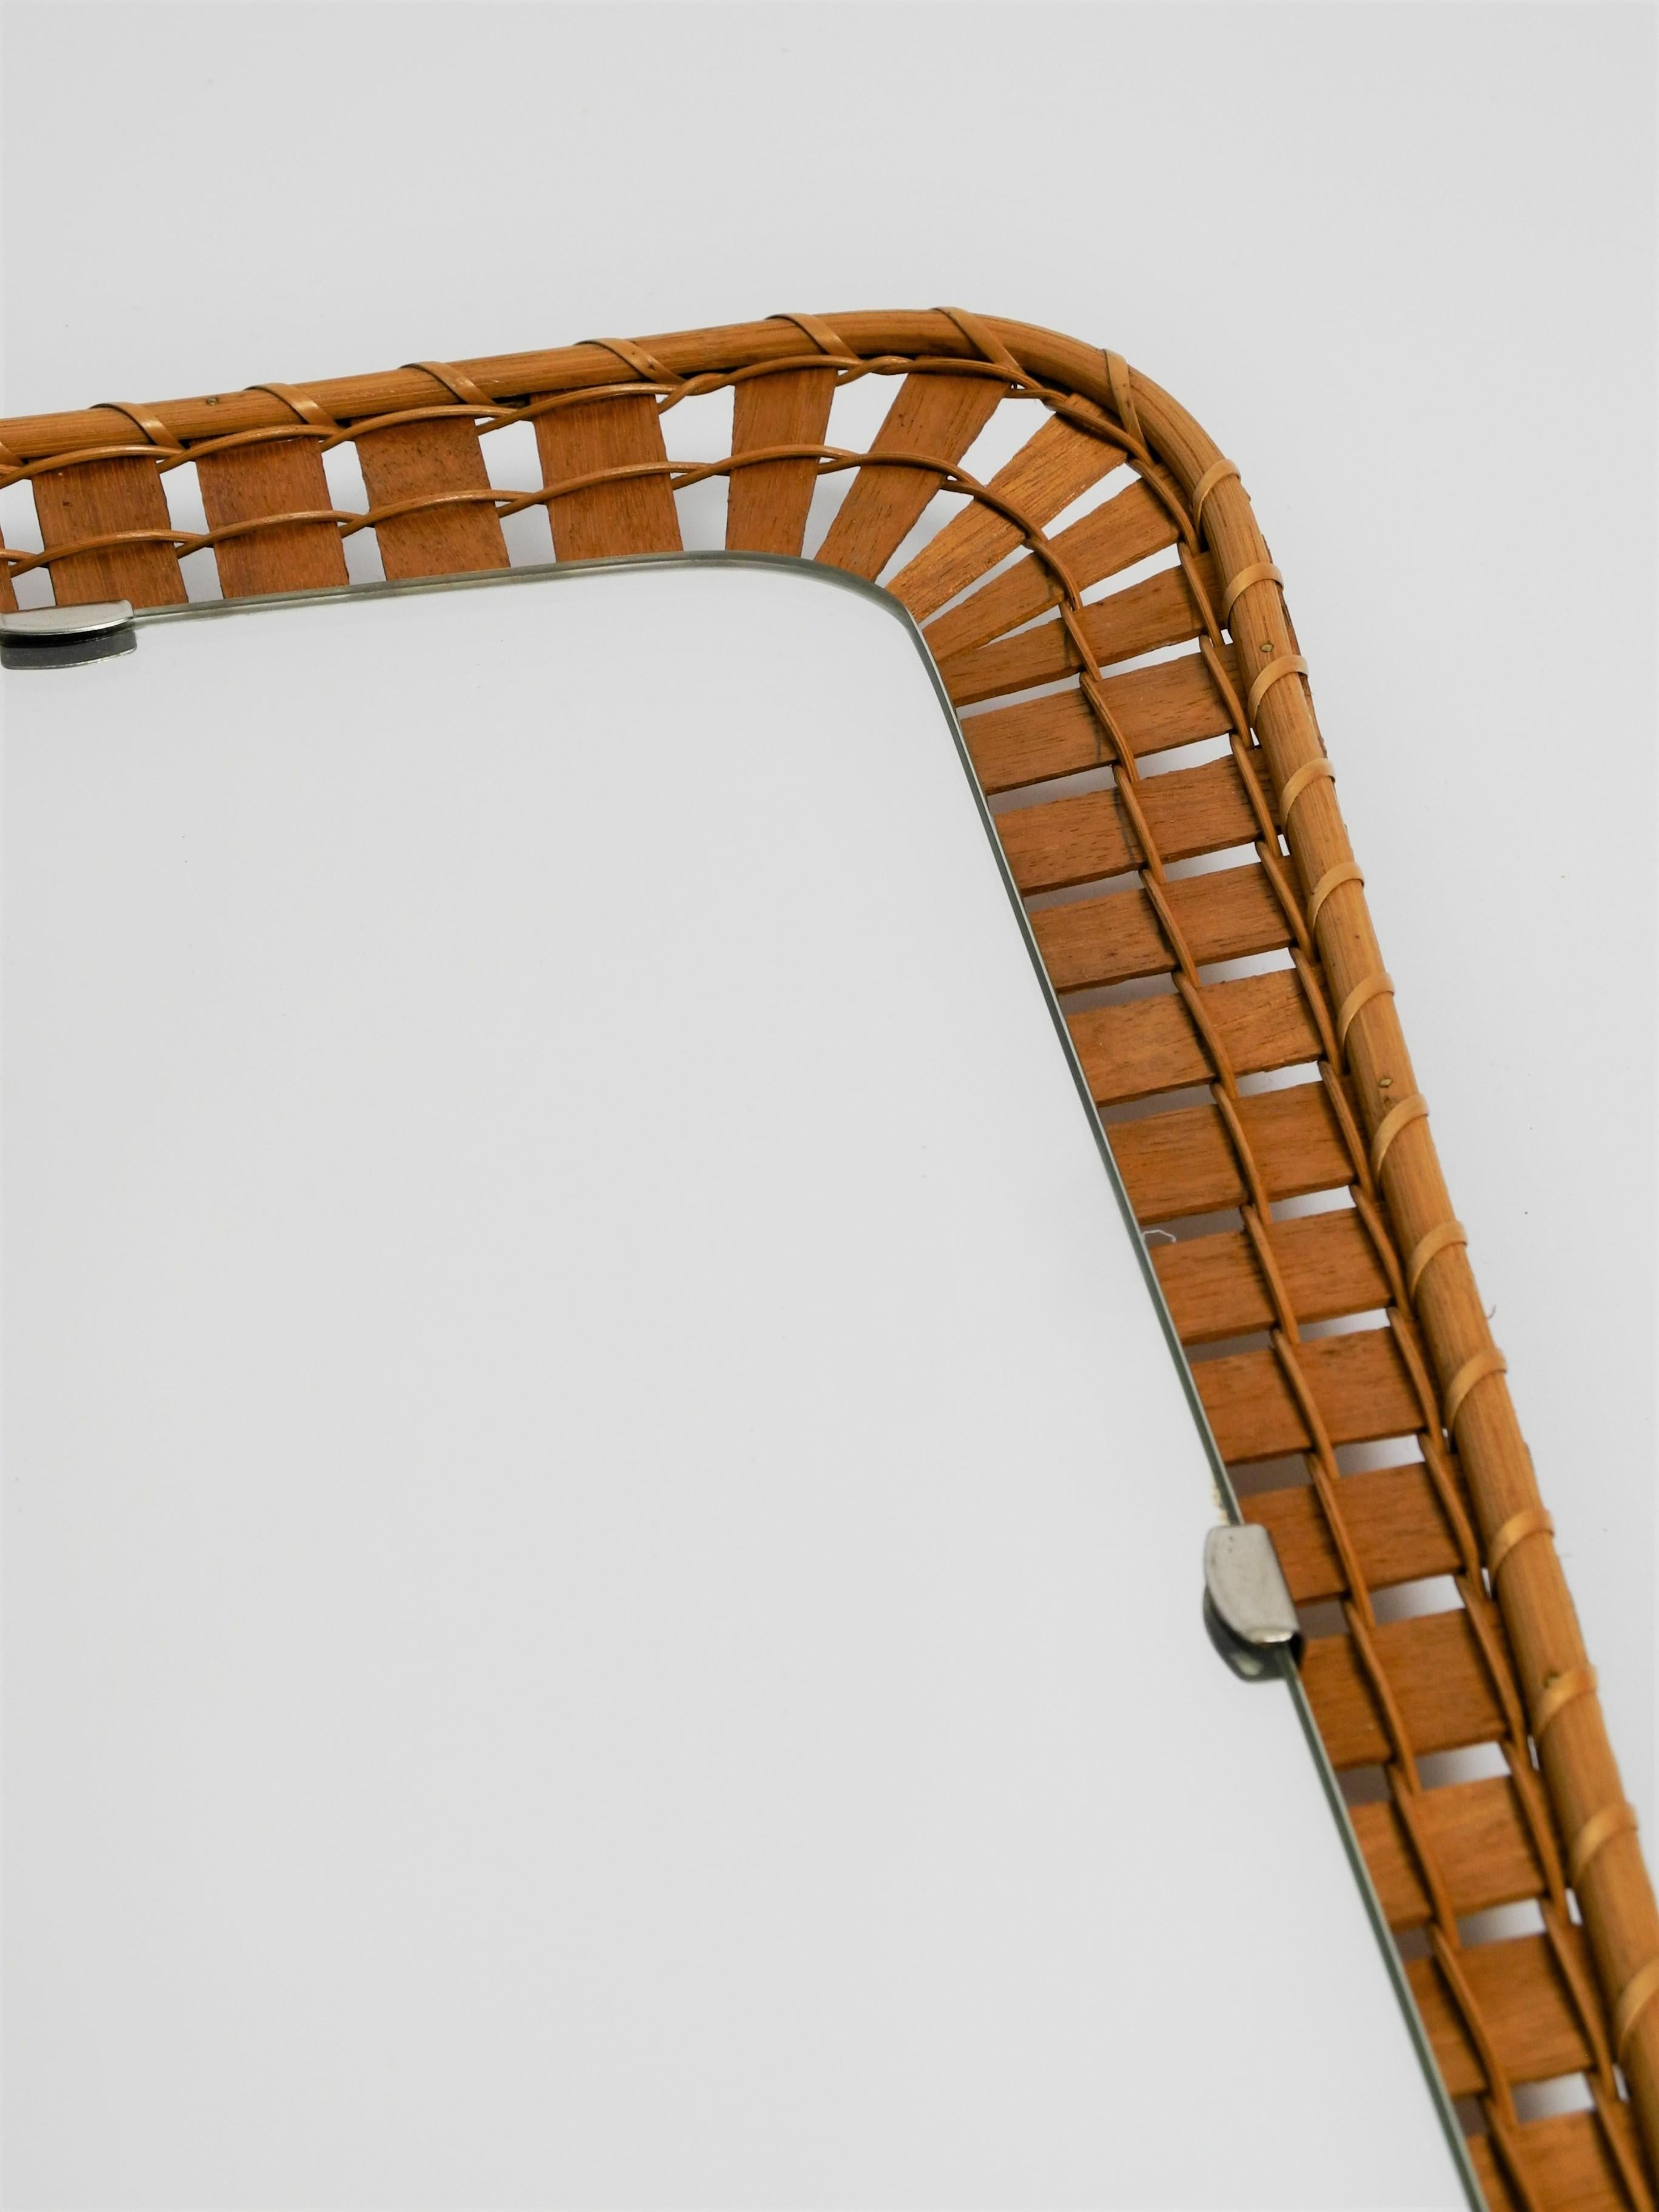 Hand-Crafted Rattan Wicker Trapeze Mirror, 70s, Italy For Sale